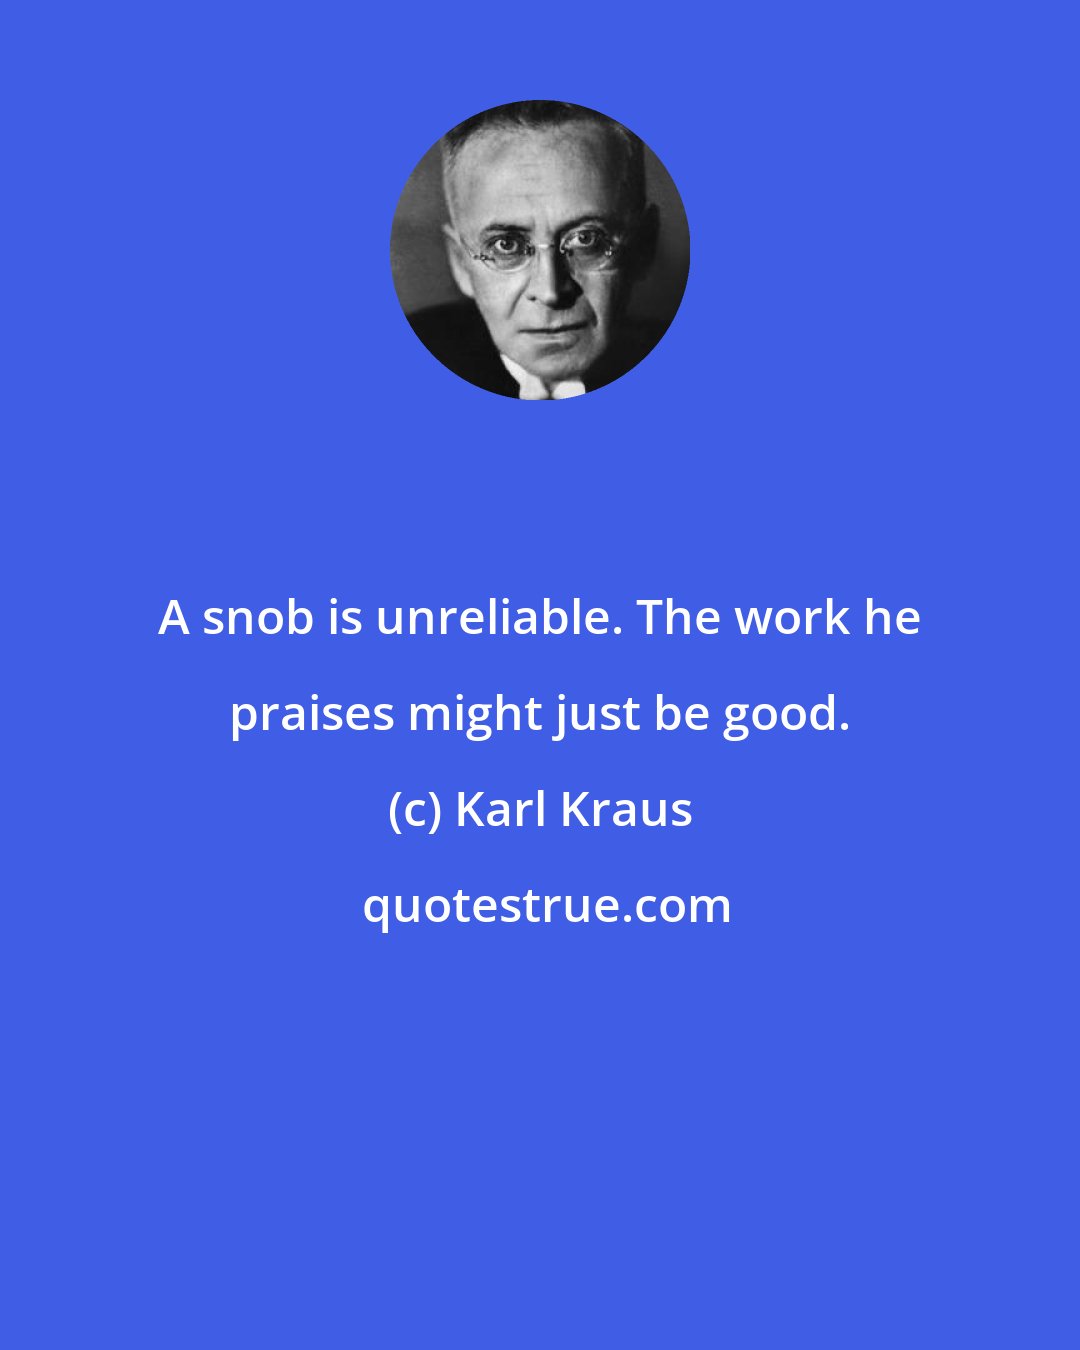 Karl Kraus: A snob is unreliable. The work he praises might just be good.